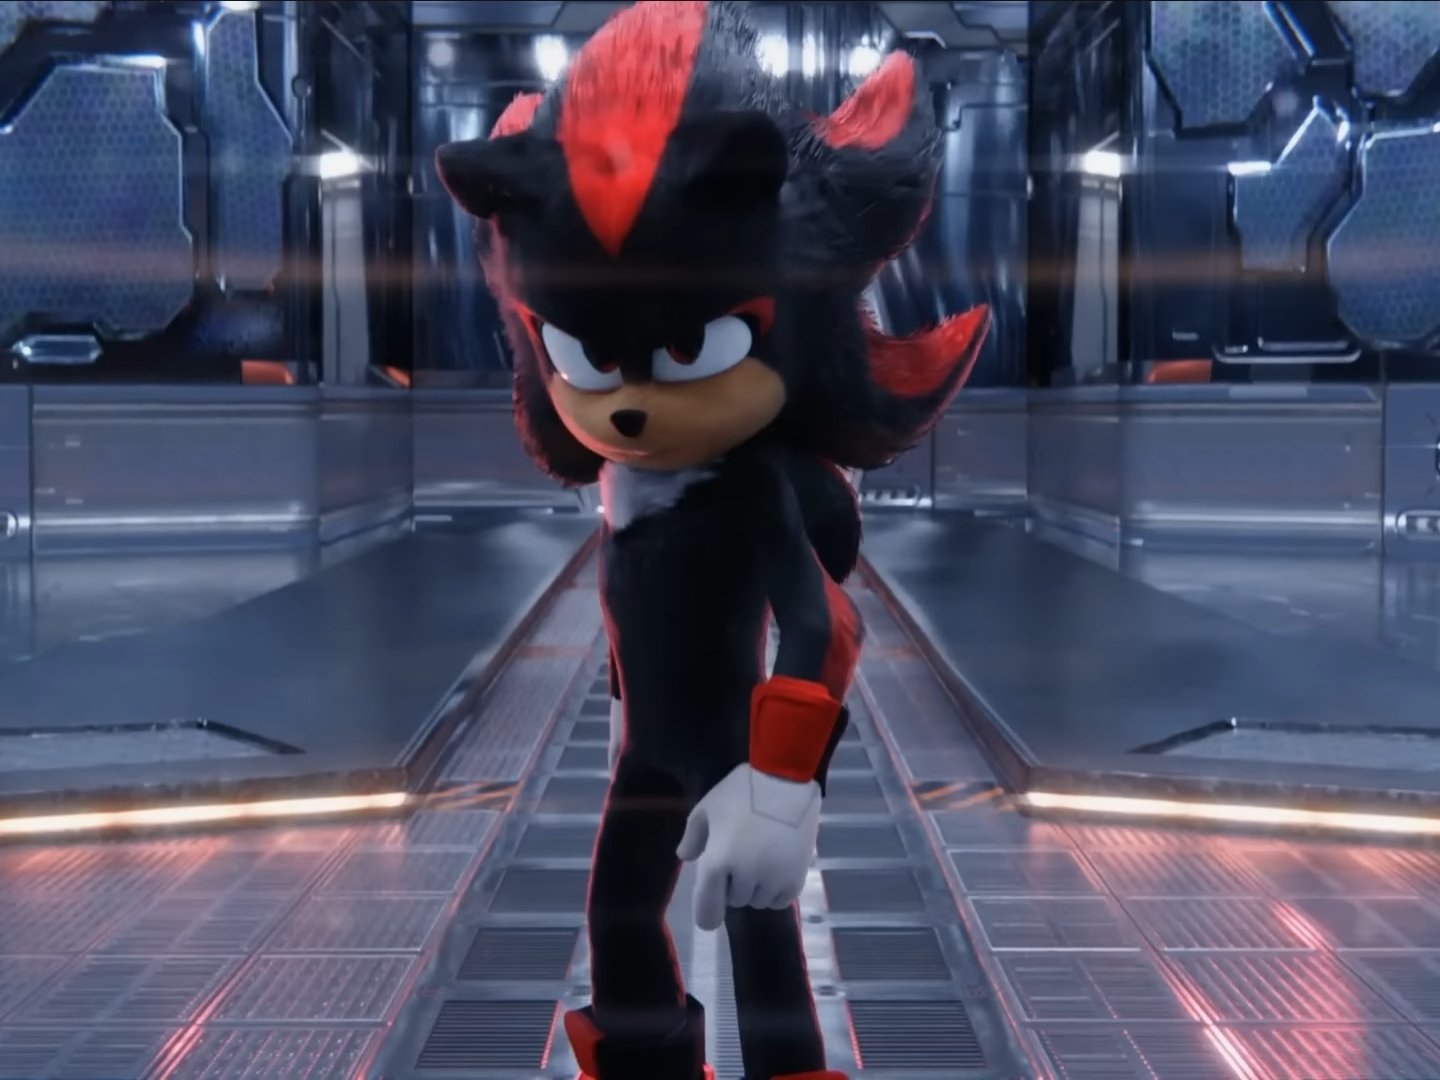 Was not ready for that 🤣#shadow #shadowthehedgehog